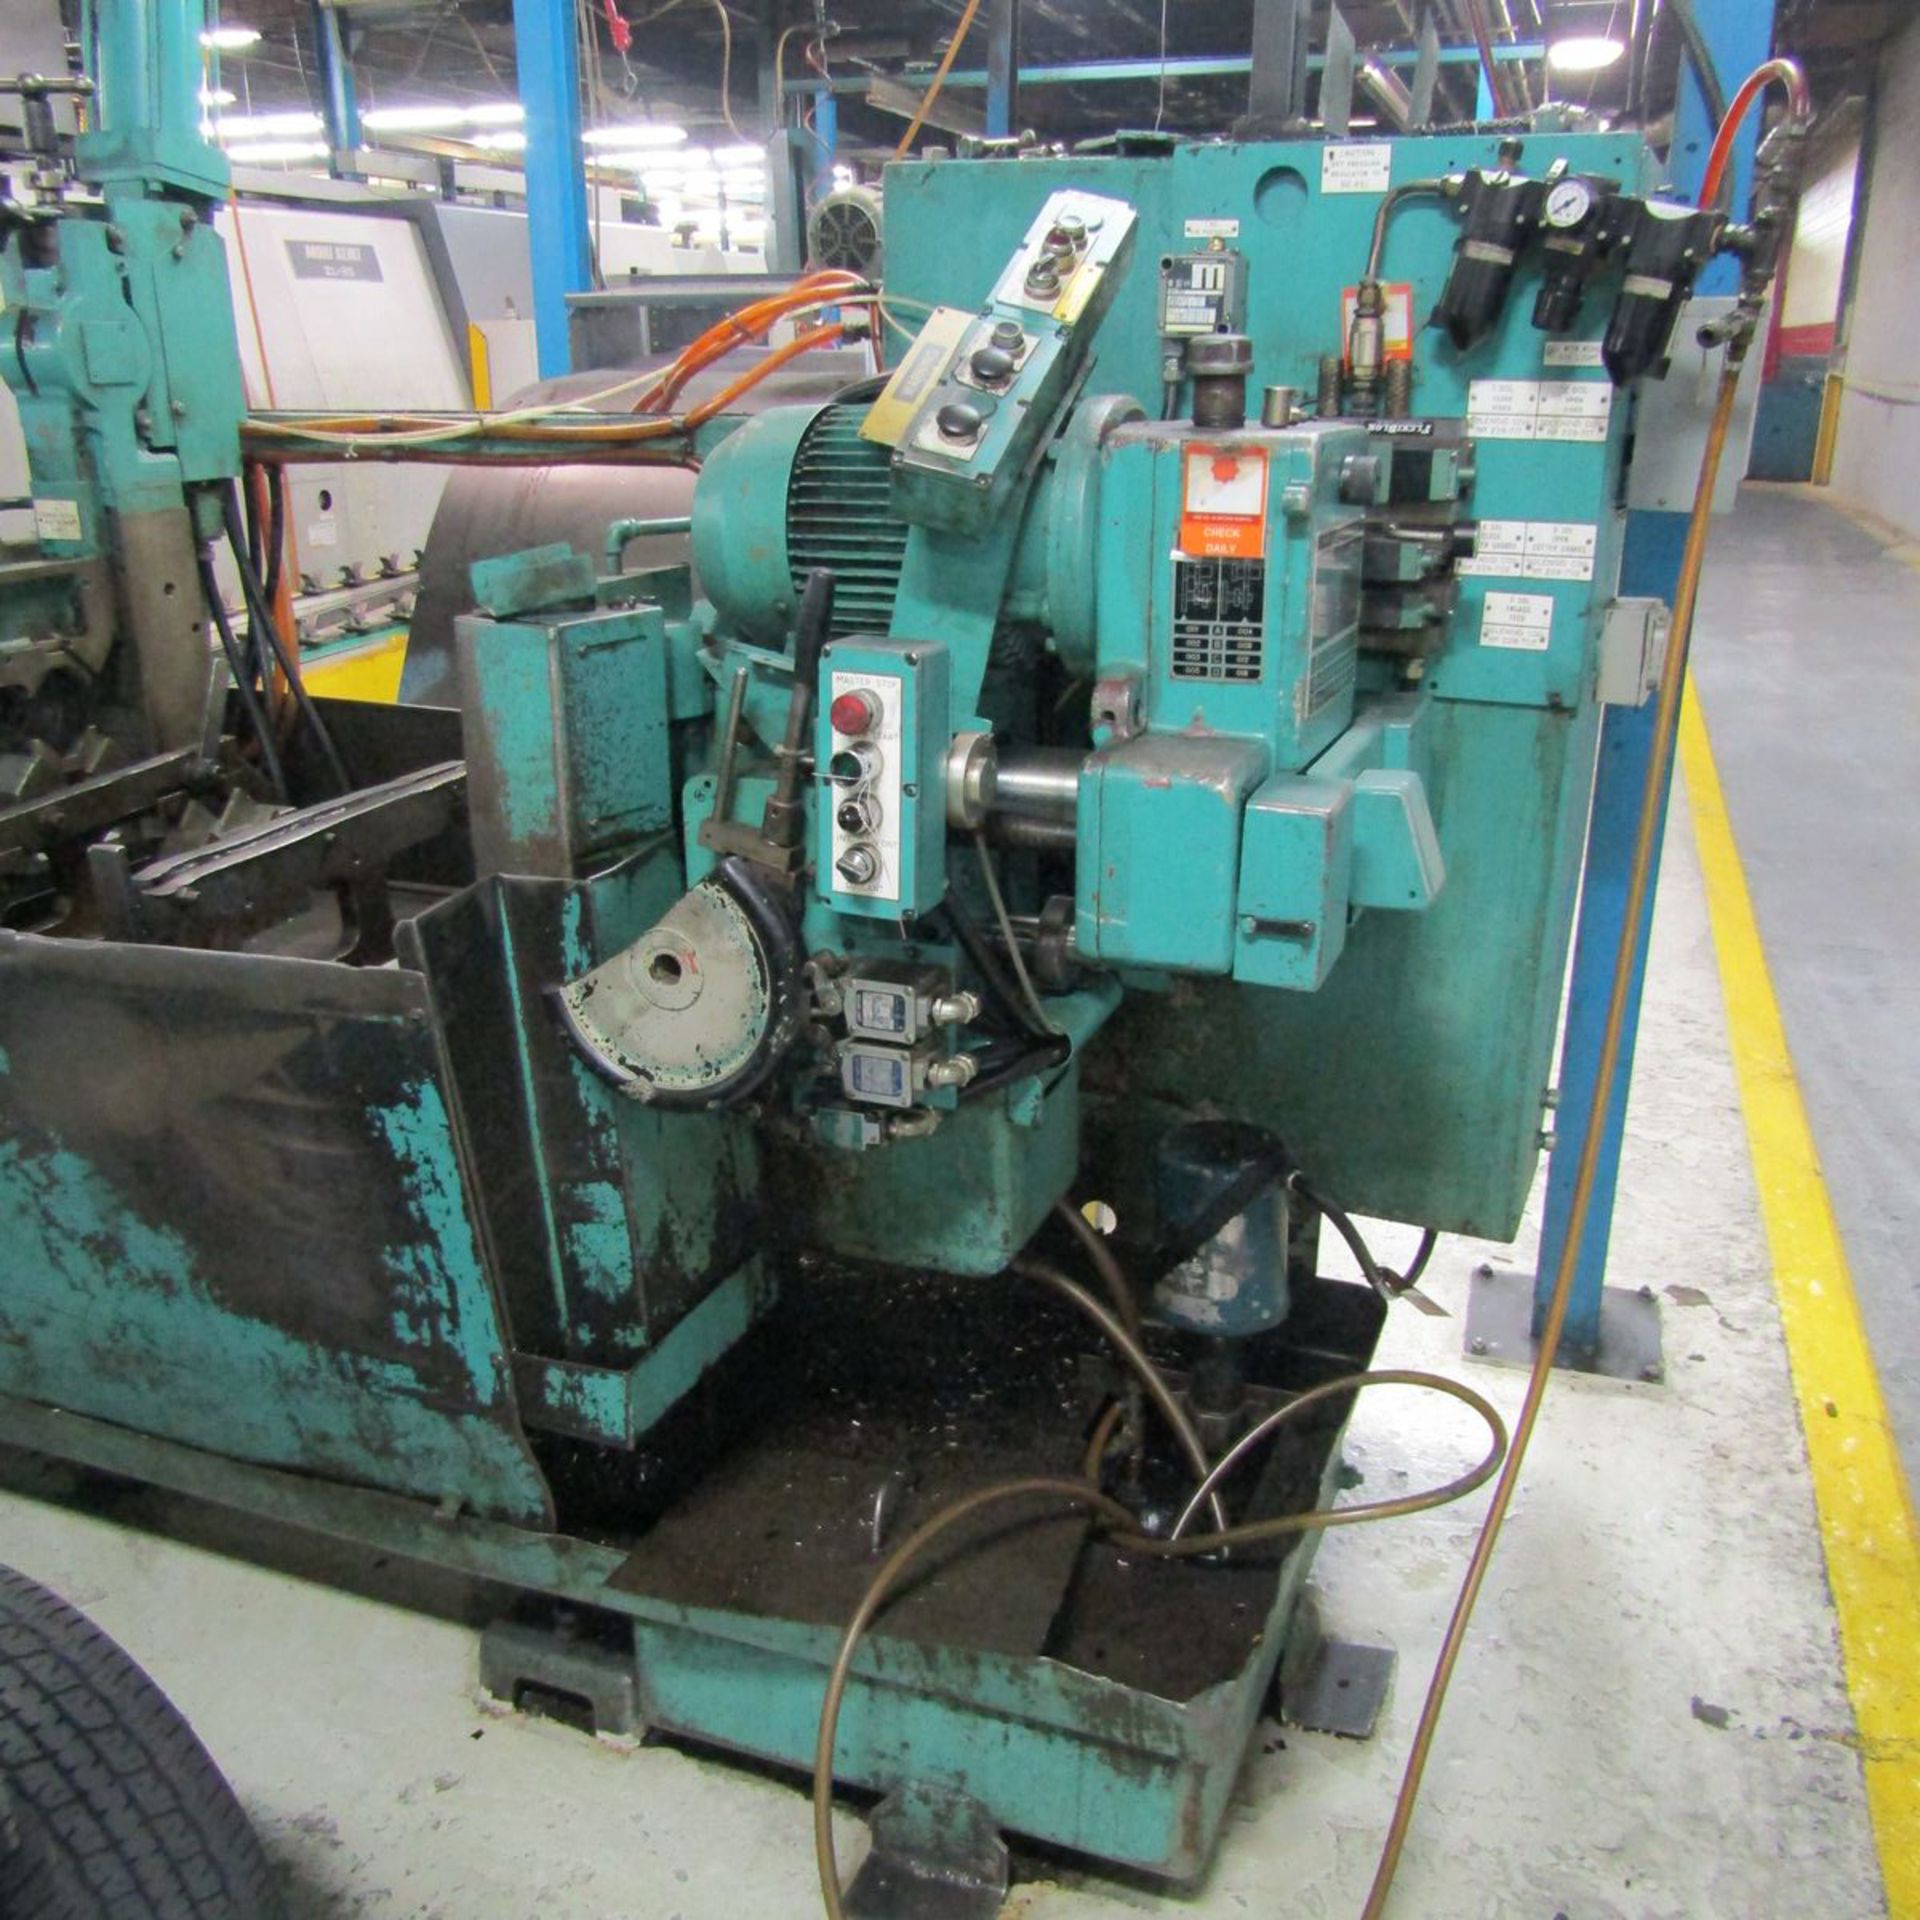 Hey No. 3 Automatic Facing and Centering Machine Max. Diameter of Work 6.25", Motor power Right/left - Image 2 of 6